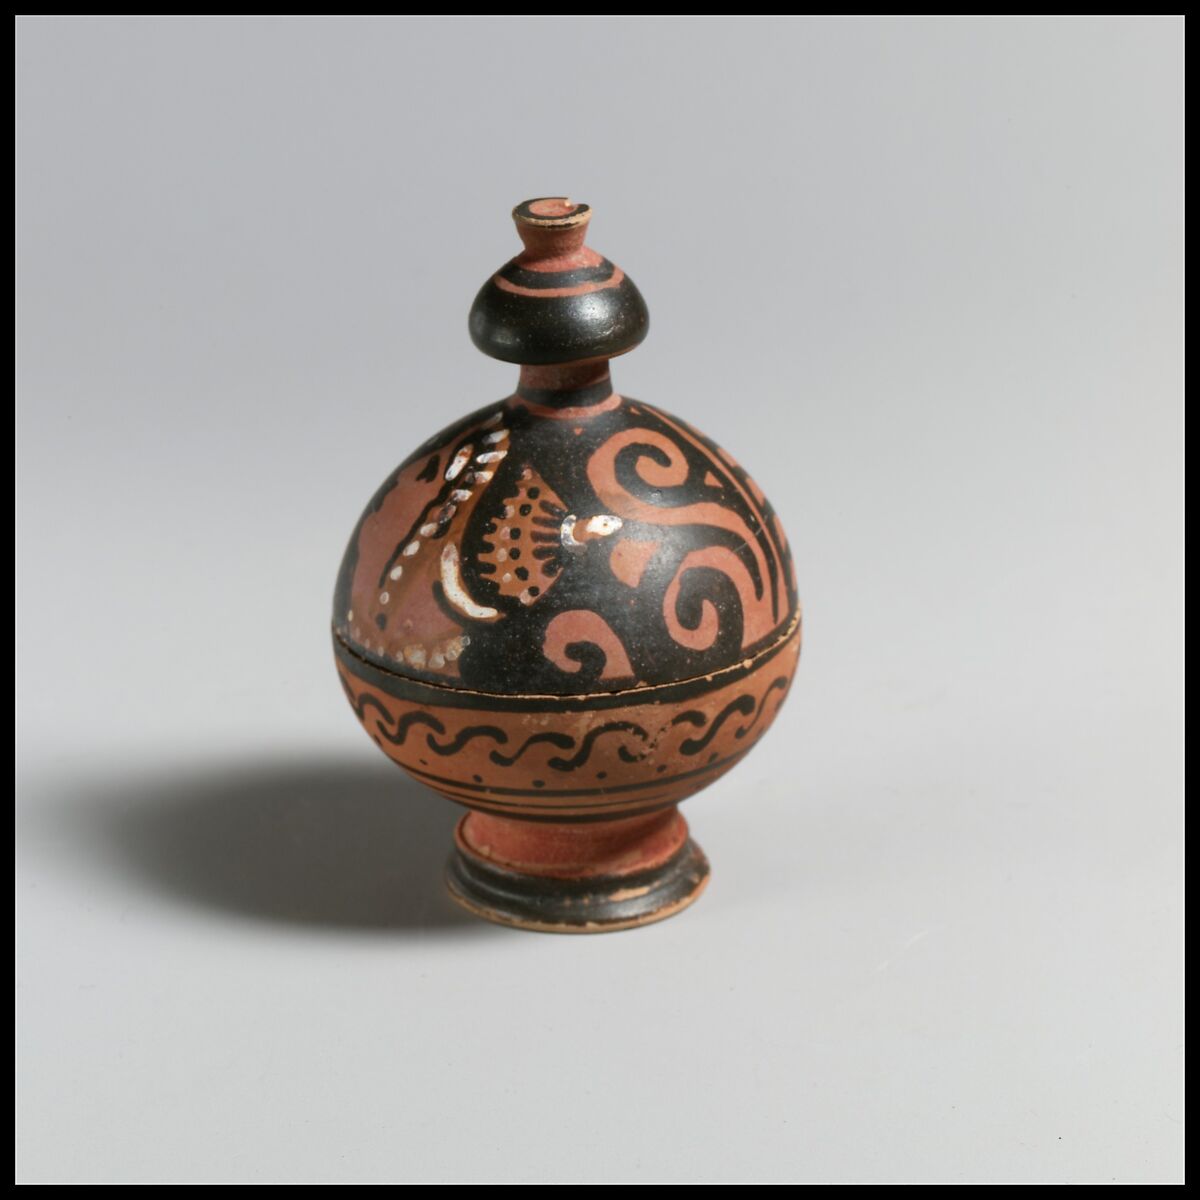 Pyxis, Attributed to the Stoke-on-Trent Group: "Pouting Lips" Sub-Group, Terracotta, Greek, South Italian, Apulian 